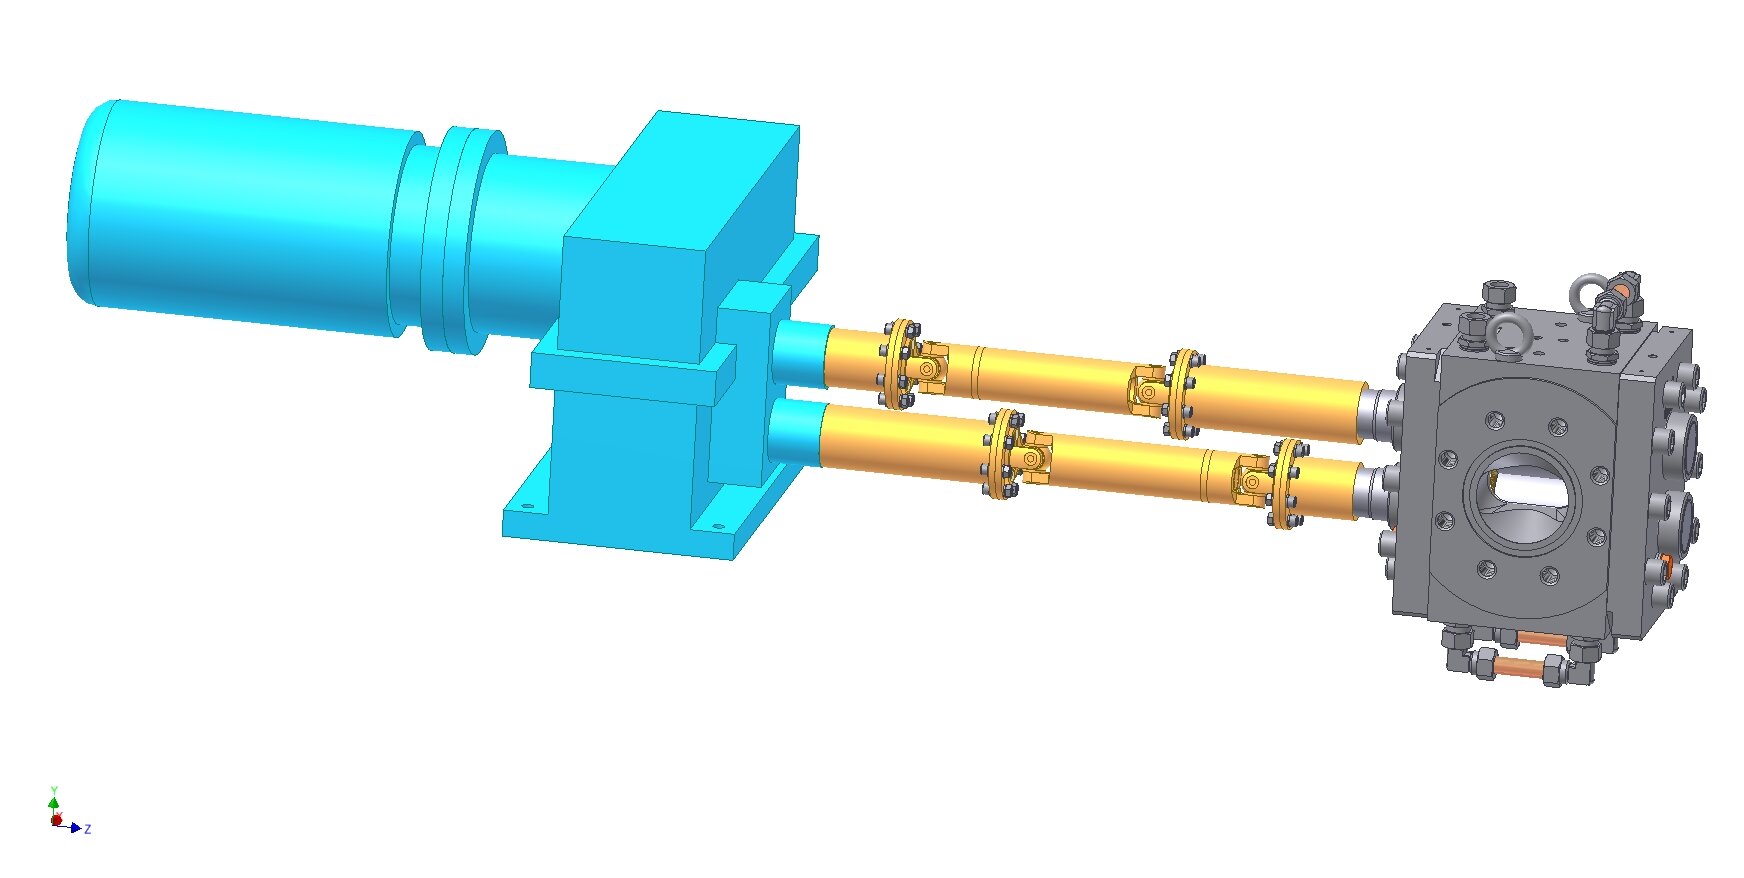  Eprotec gear pump for plastic sheet extrusion (extrusion gear pump) with timing gear (twin drive) for X-LDPE production